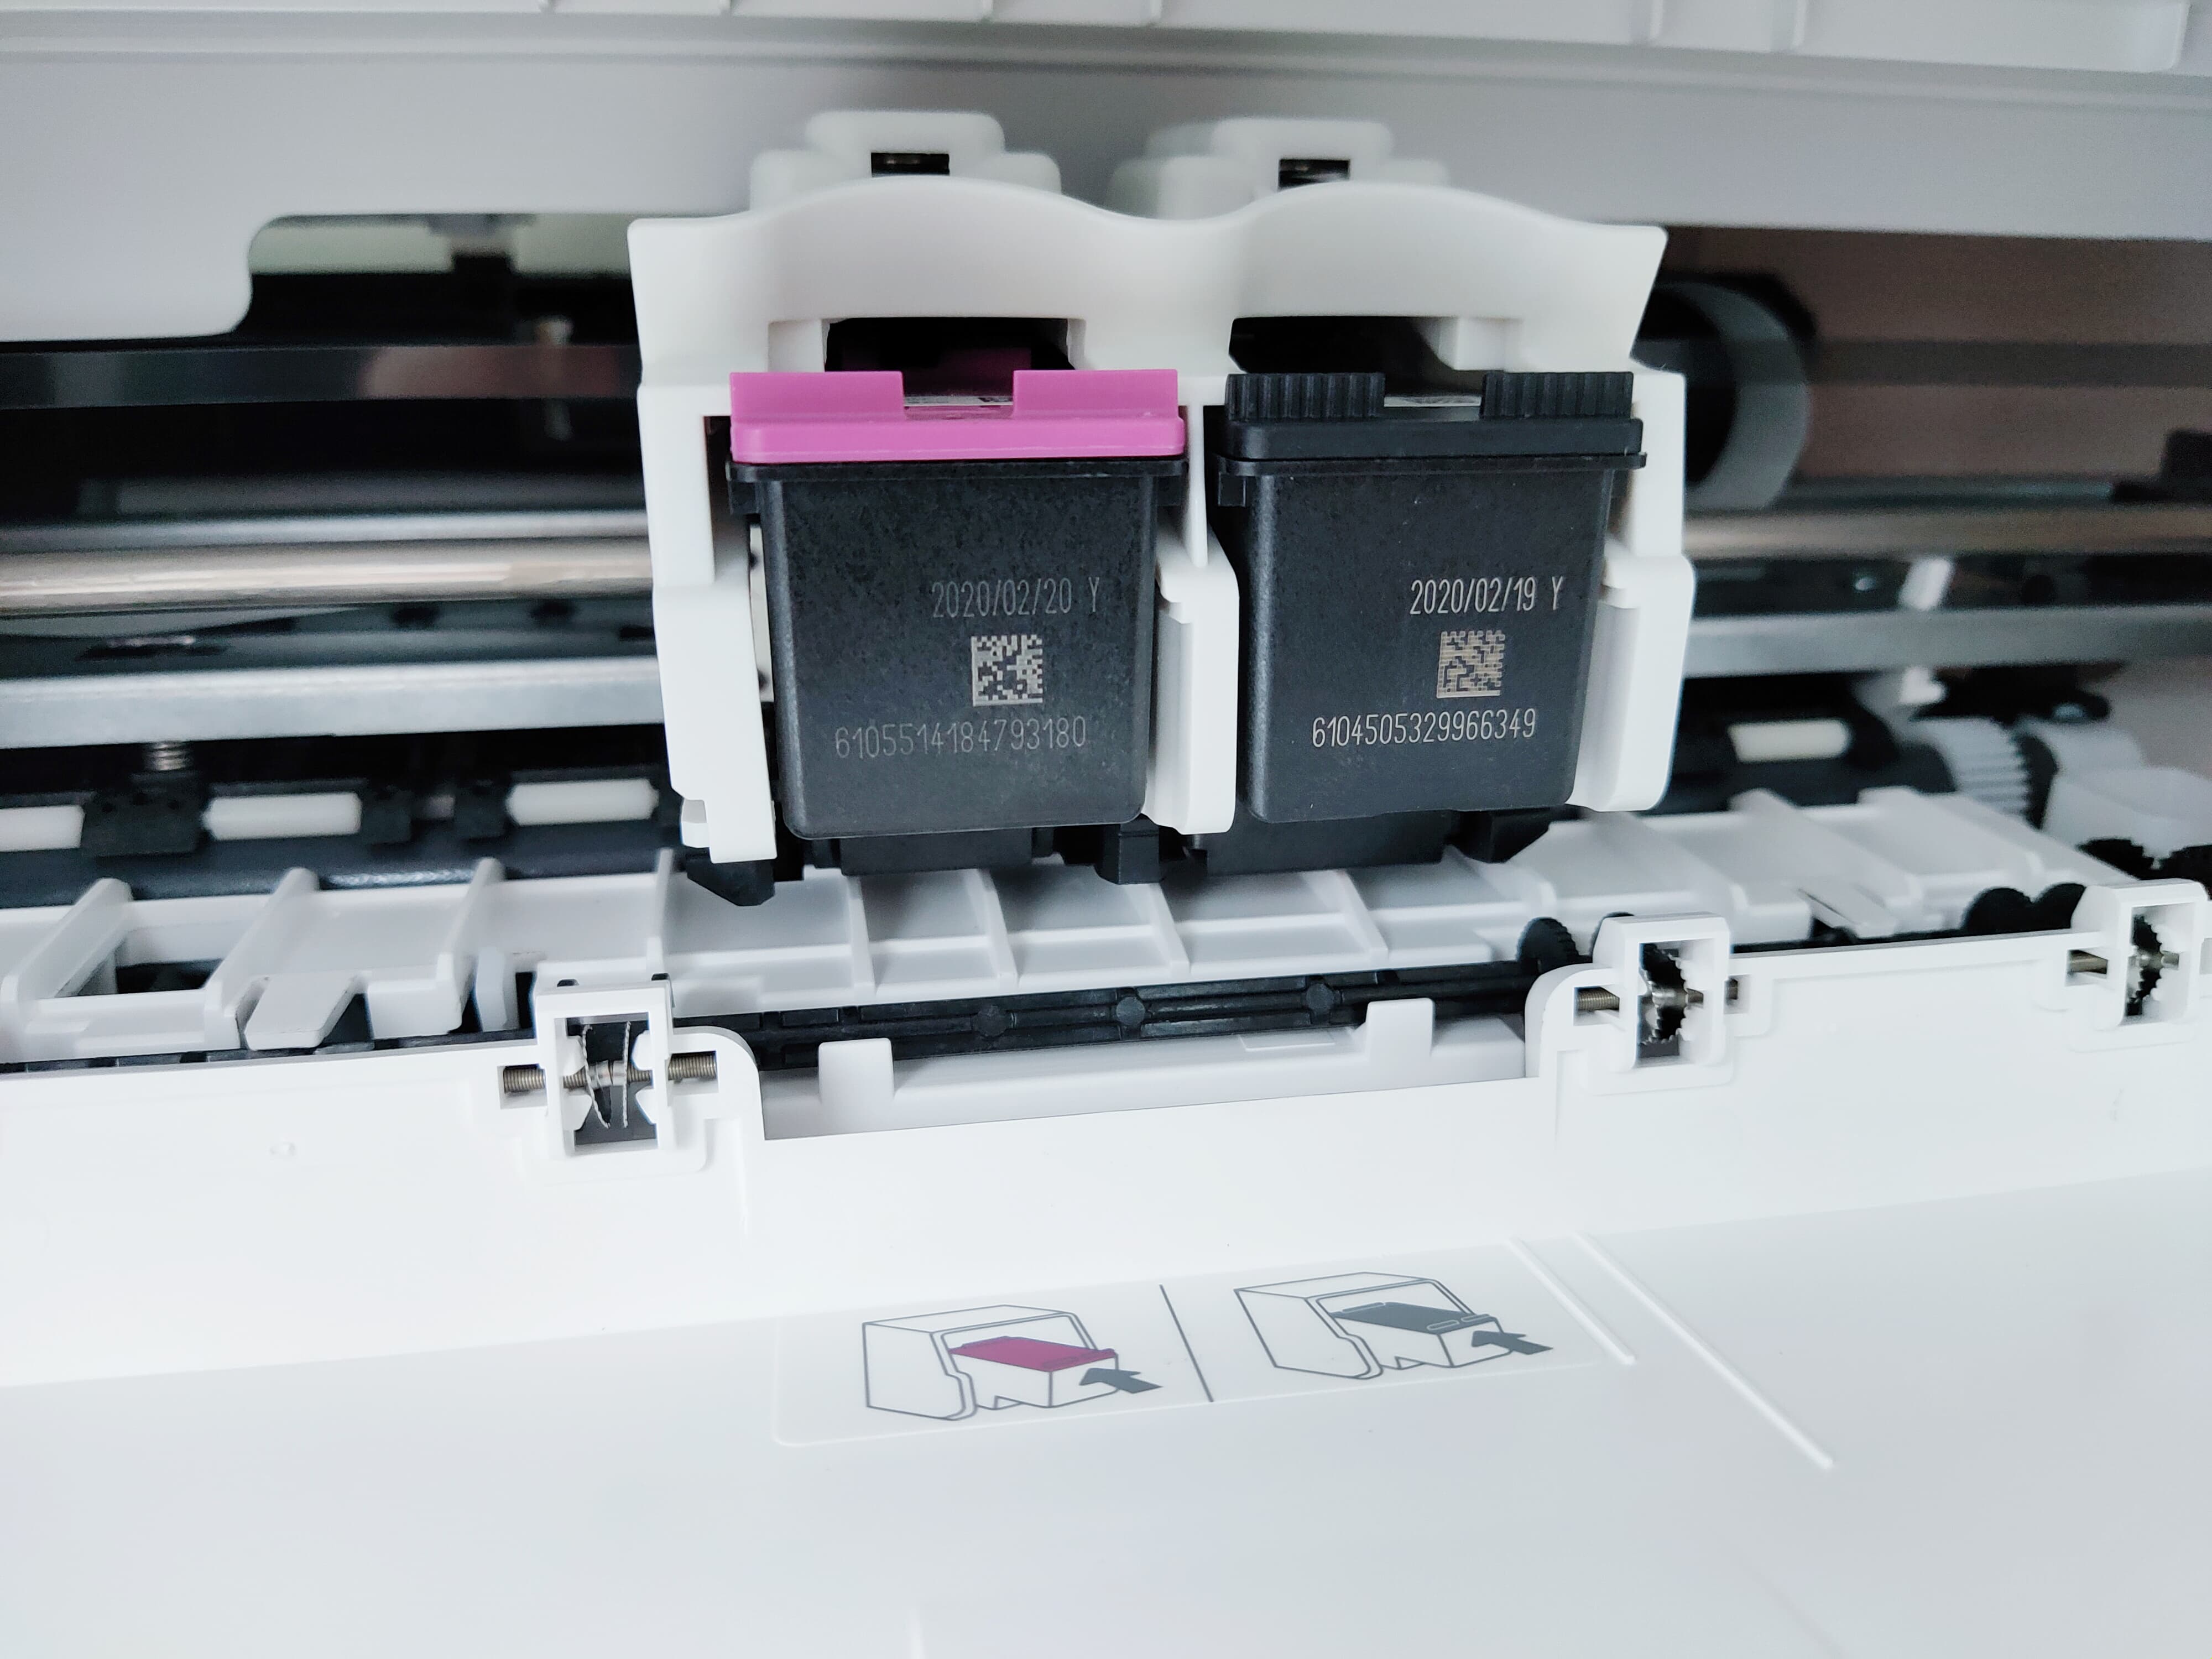 Mijia inkjet printing all-in-one machine out of the box: inkjet printing anytime, anywhere